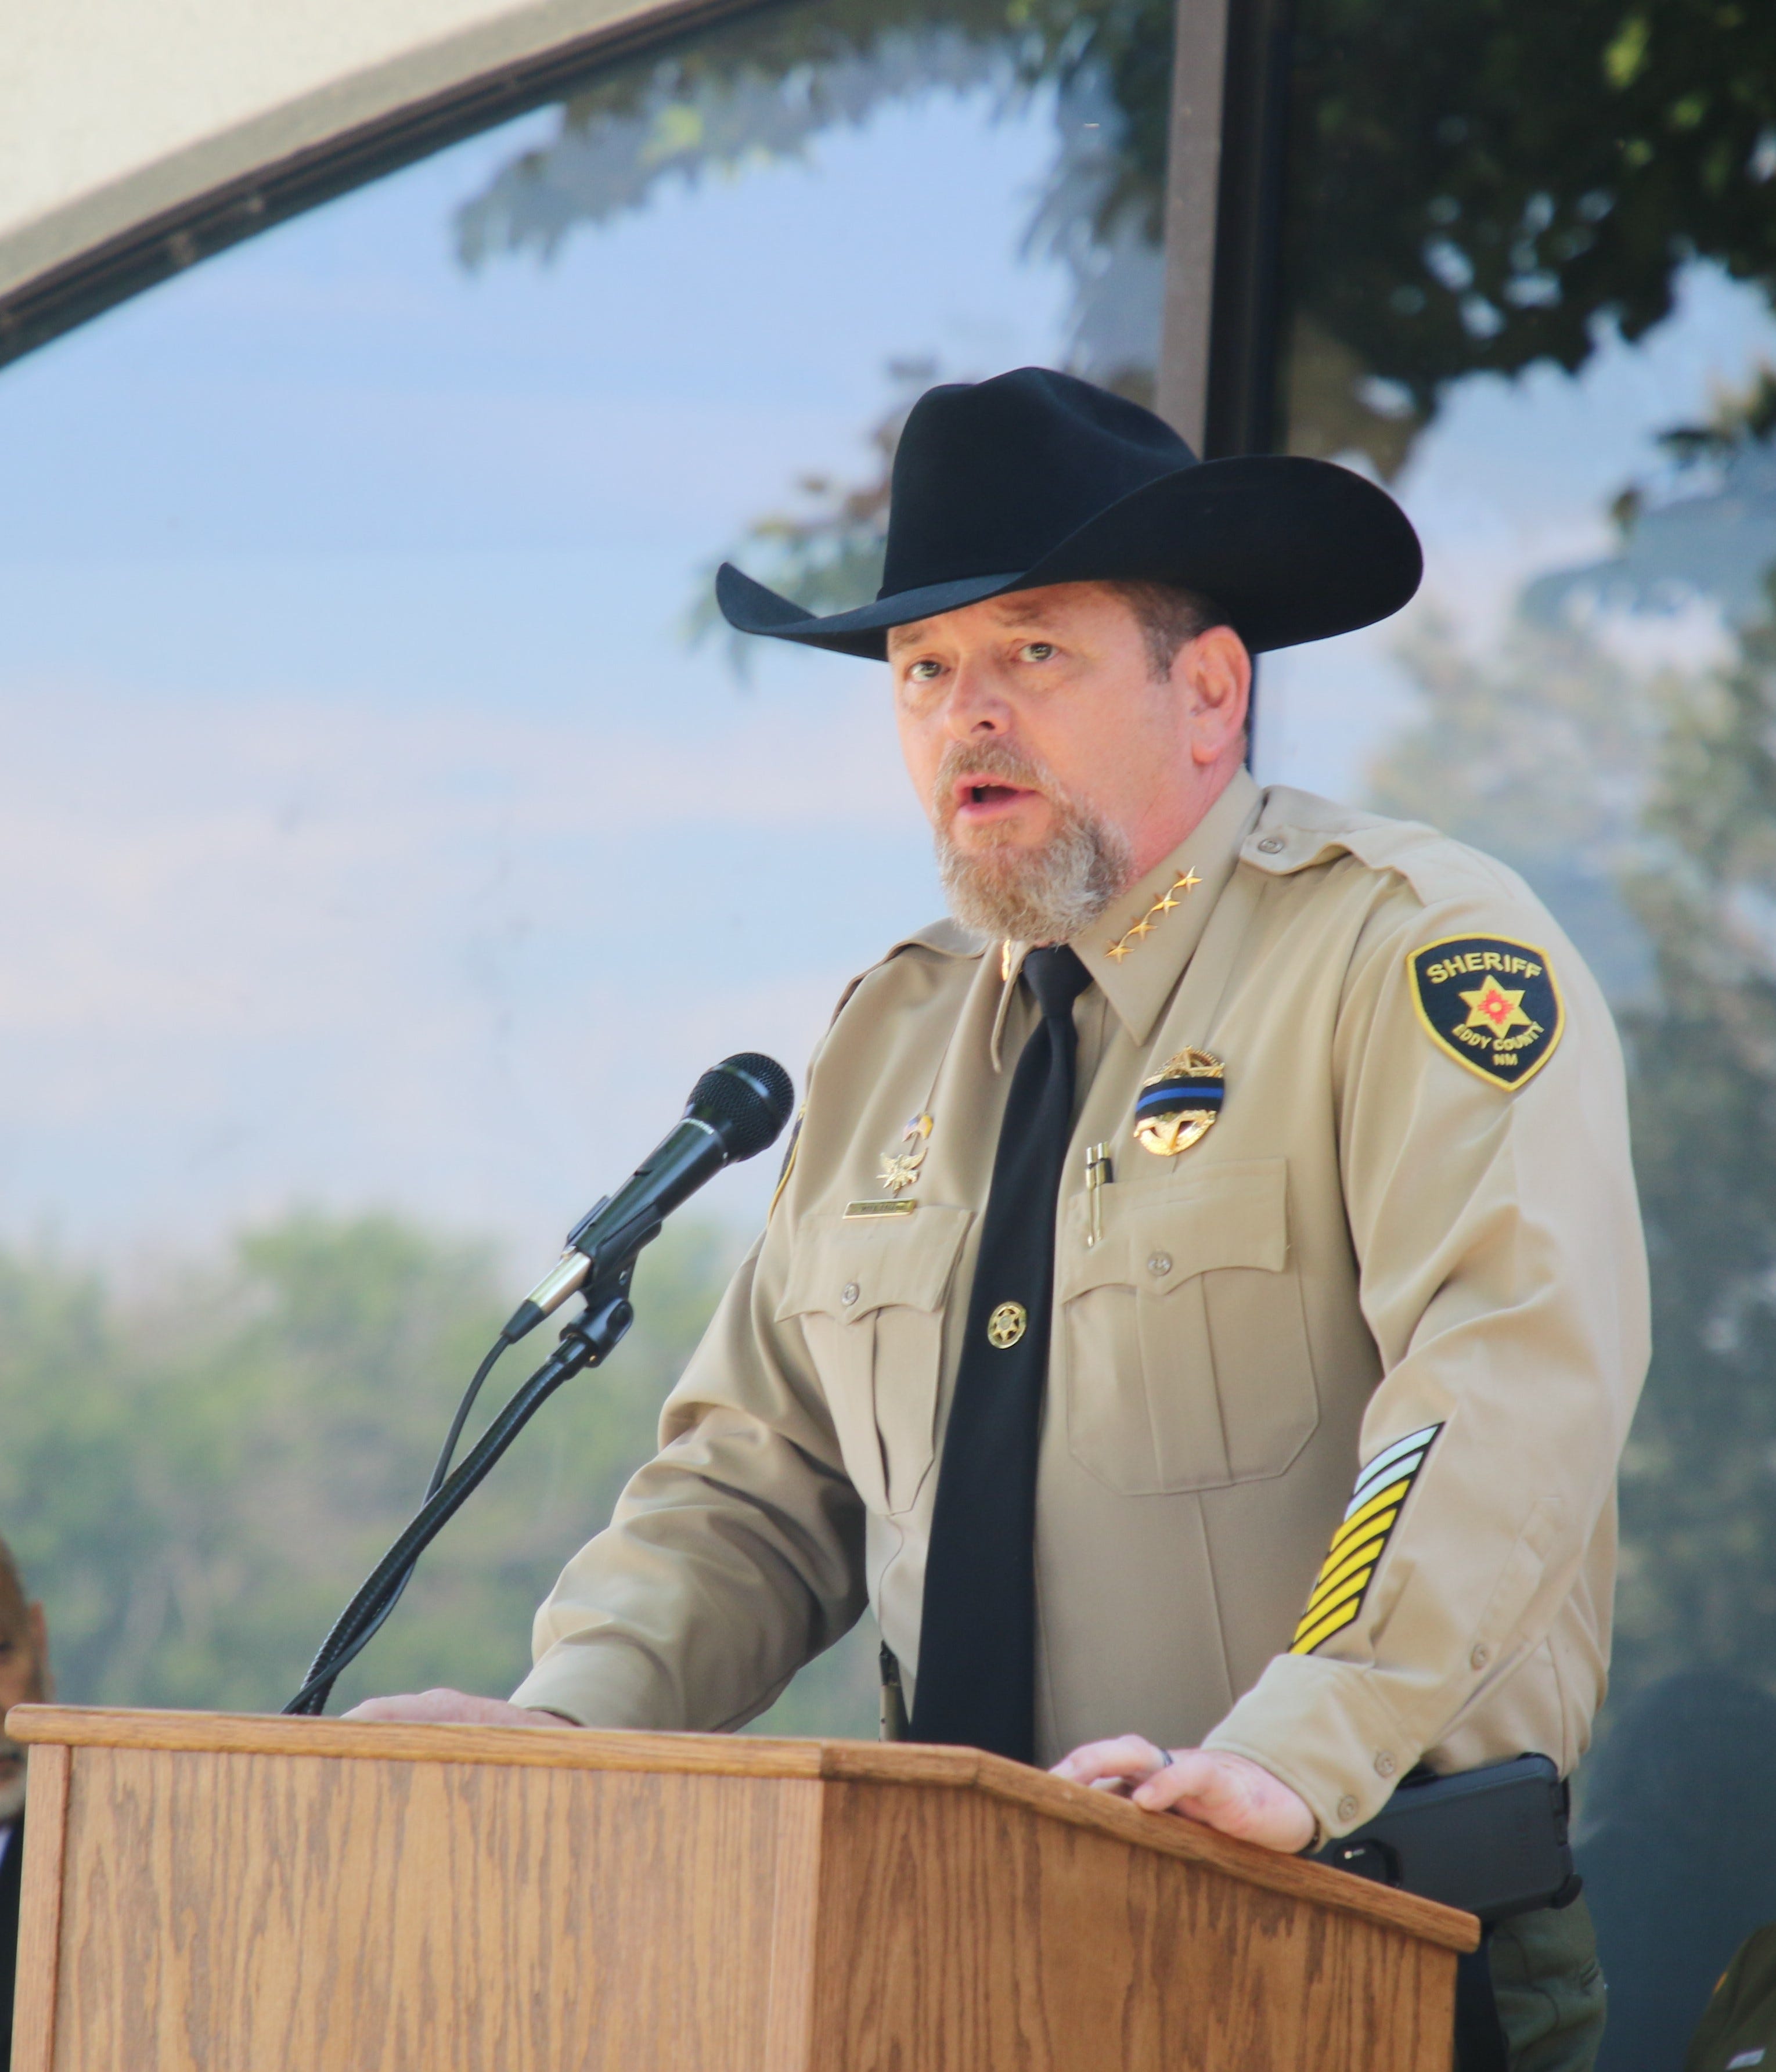 Eddy County Sheriff Mark Cage denies NRA influence